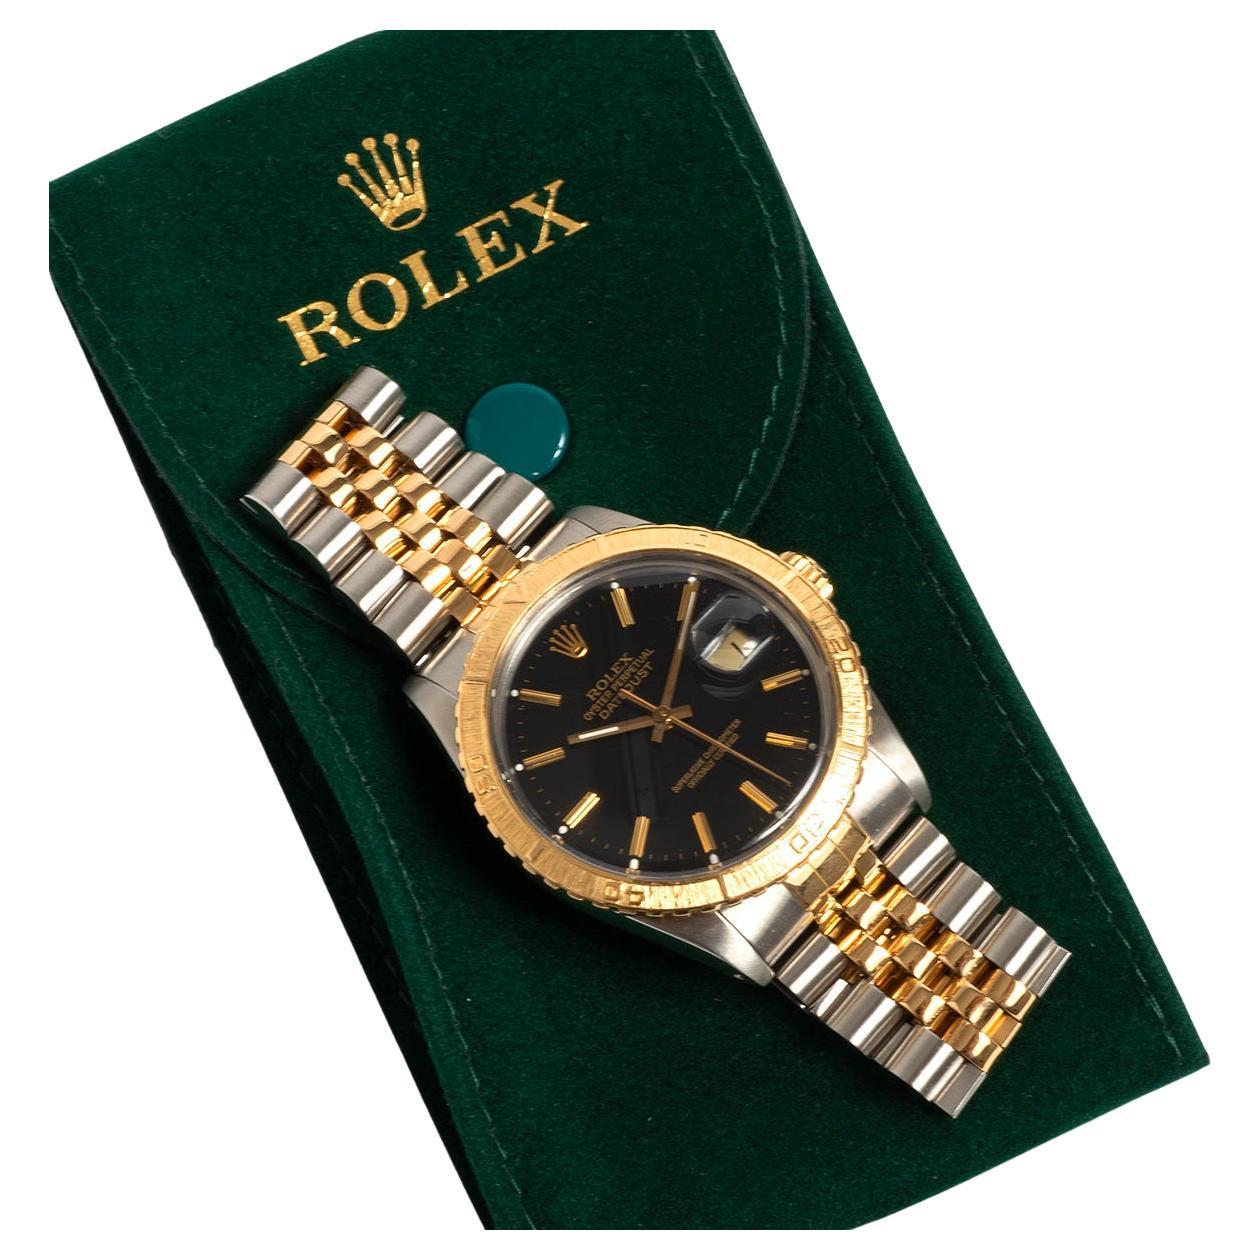 What is the Rolex Thunderbird?